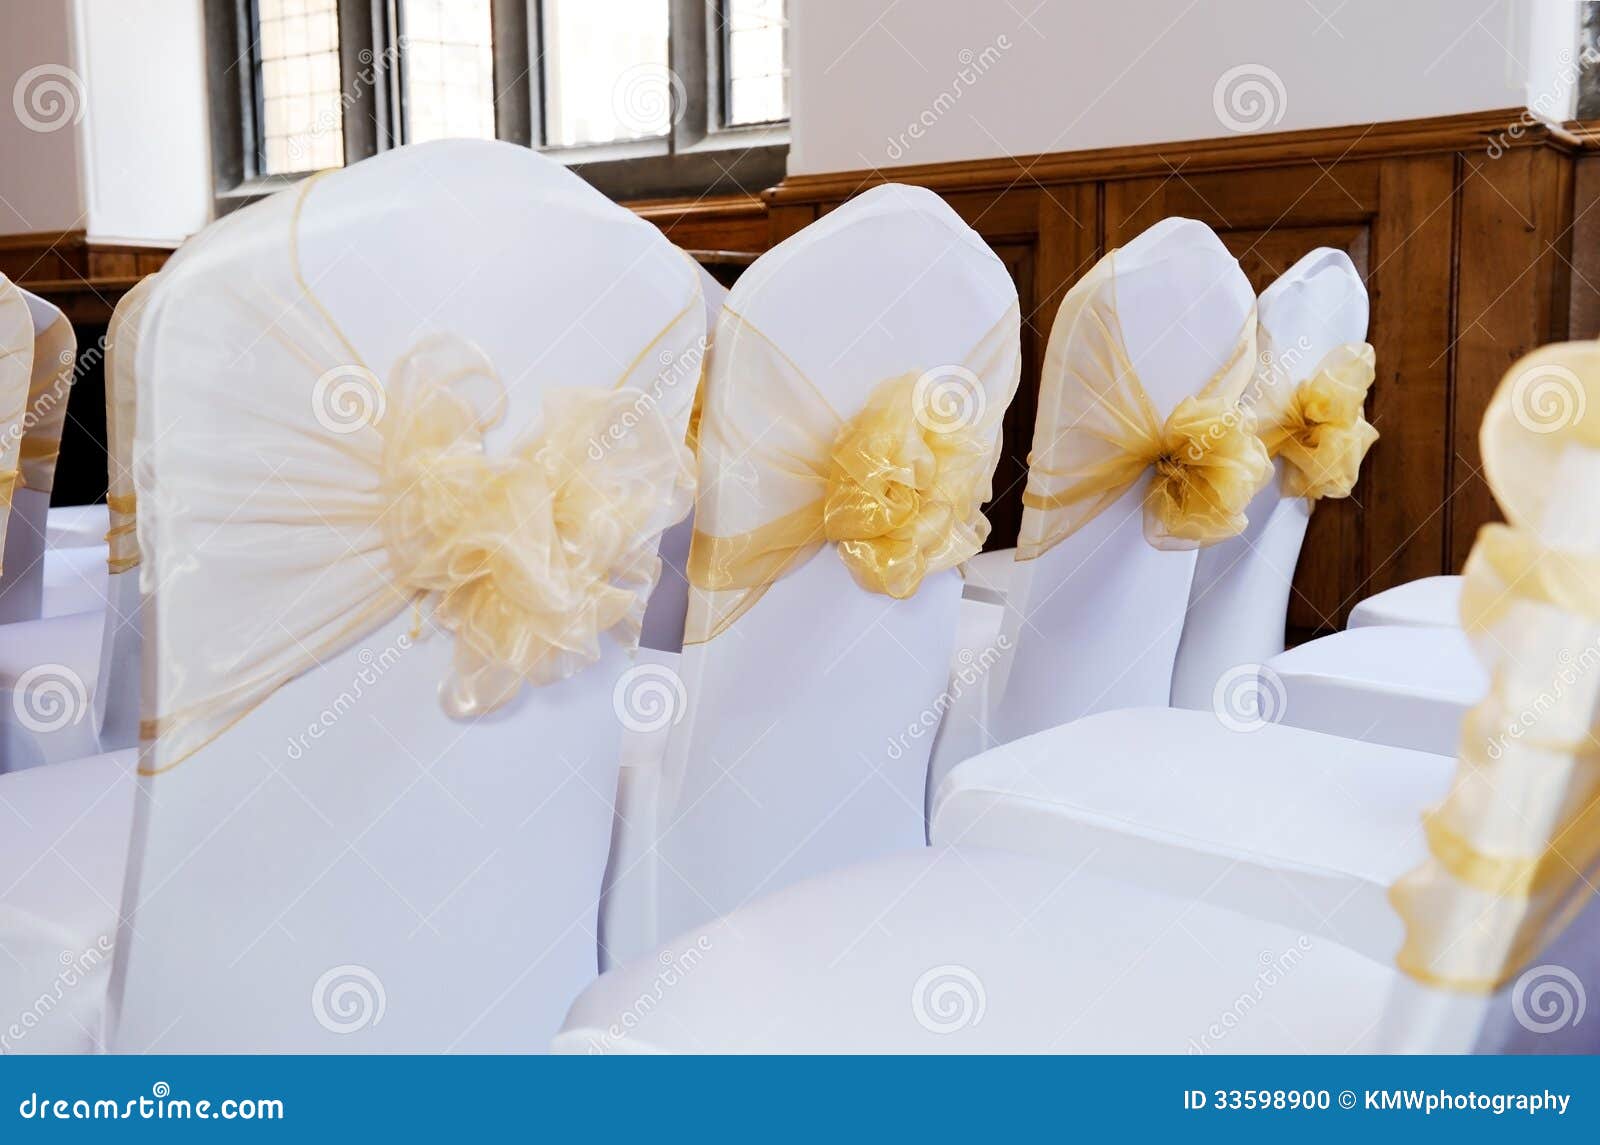 Wedding Chair Covers Stock Photo Image Of Yellow Celebration